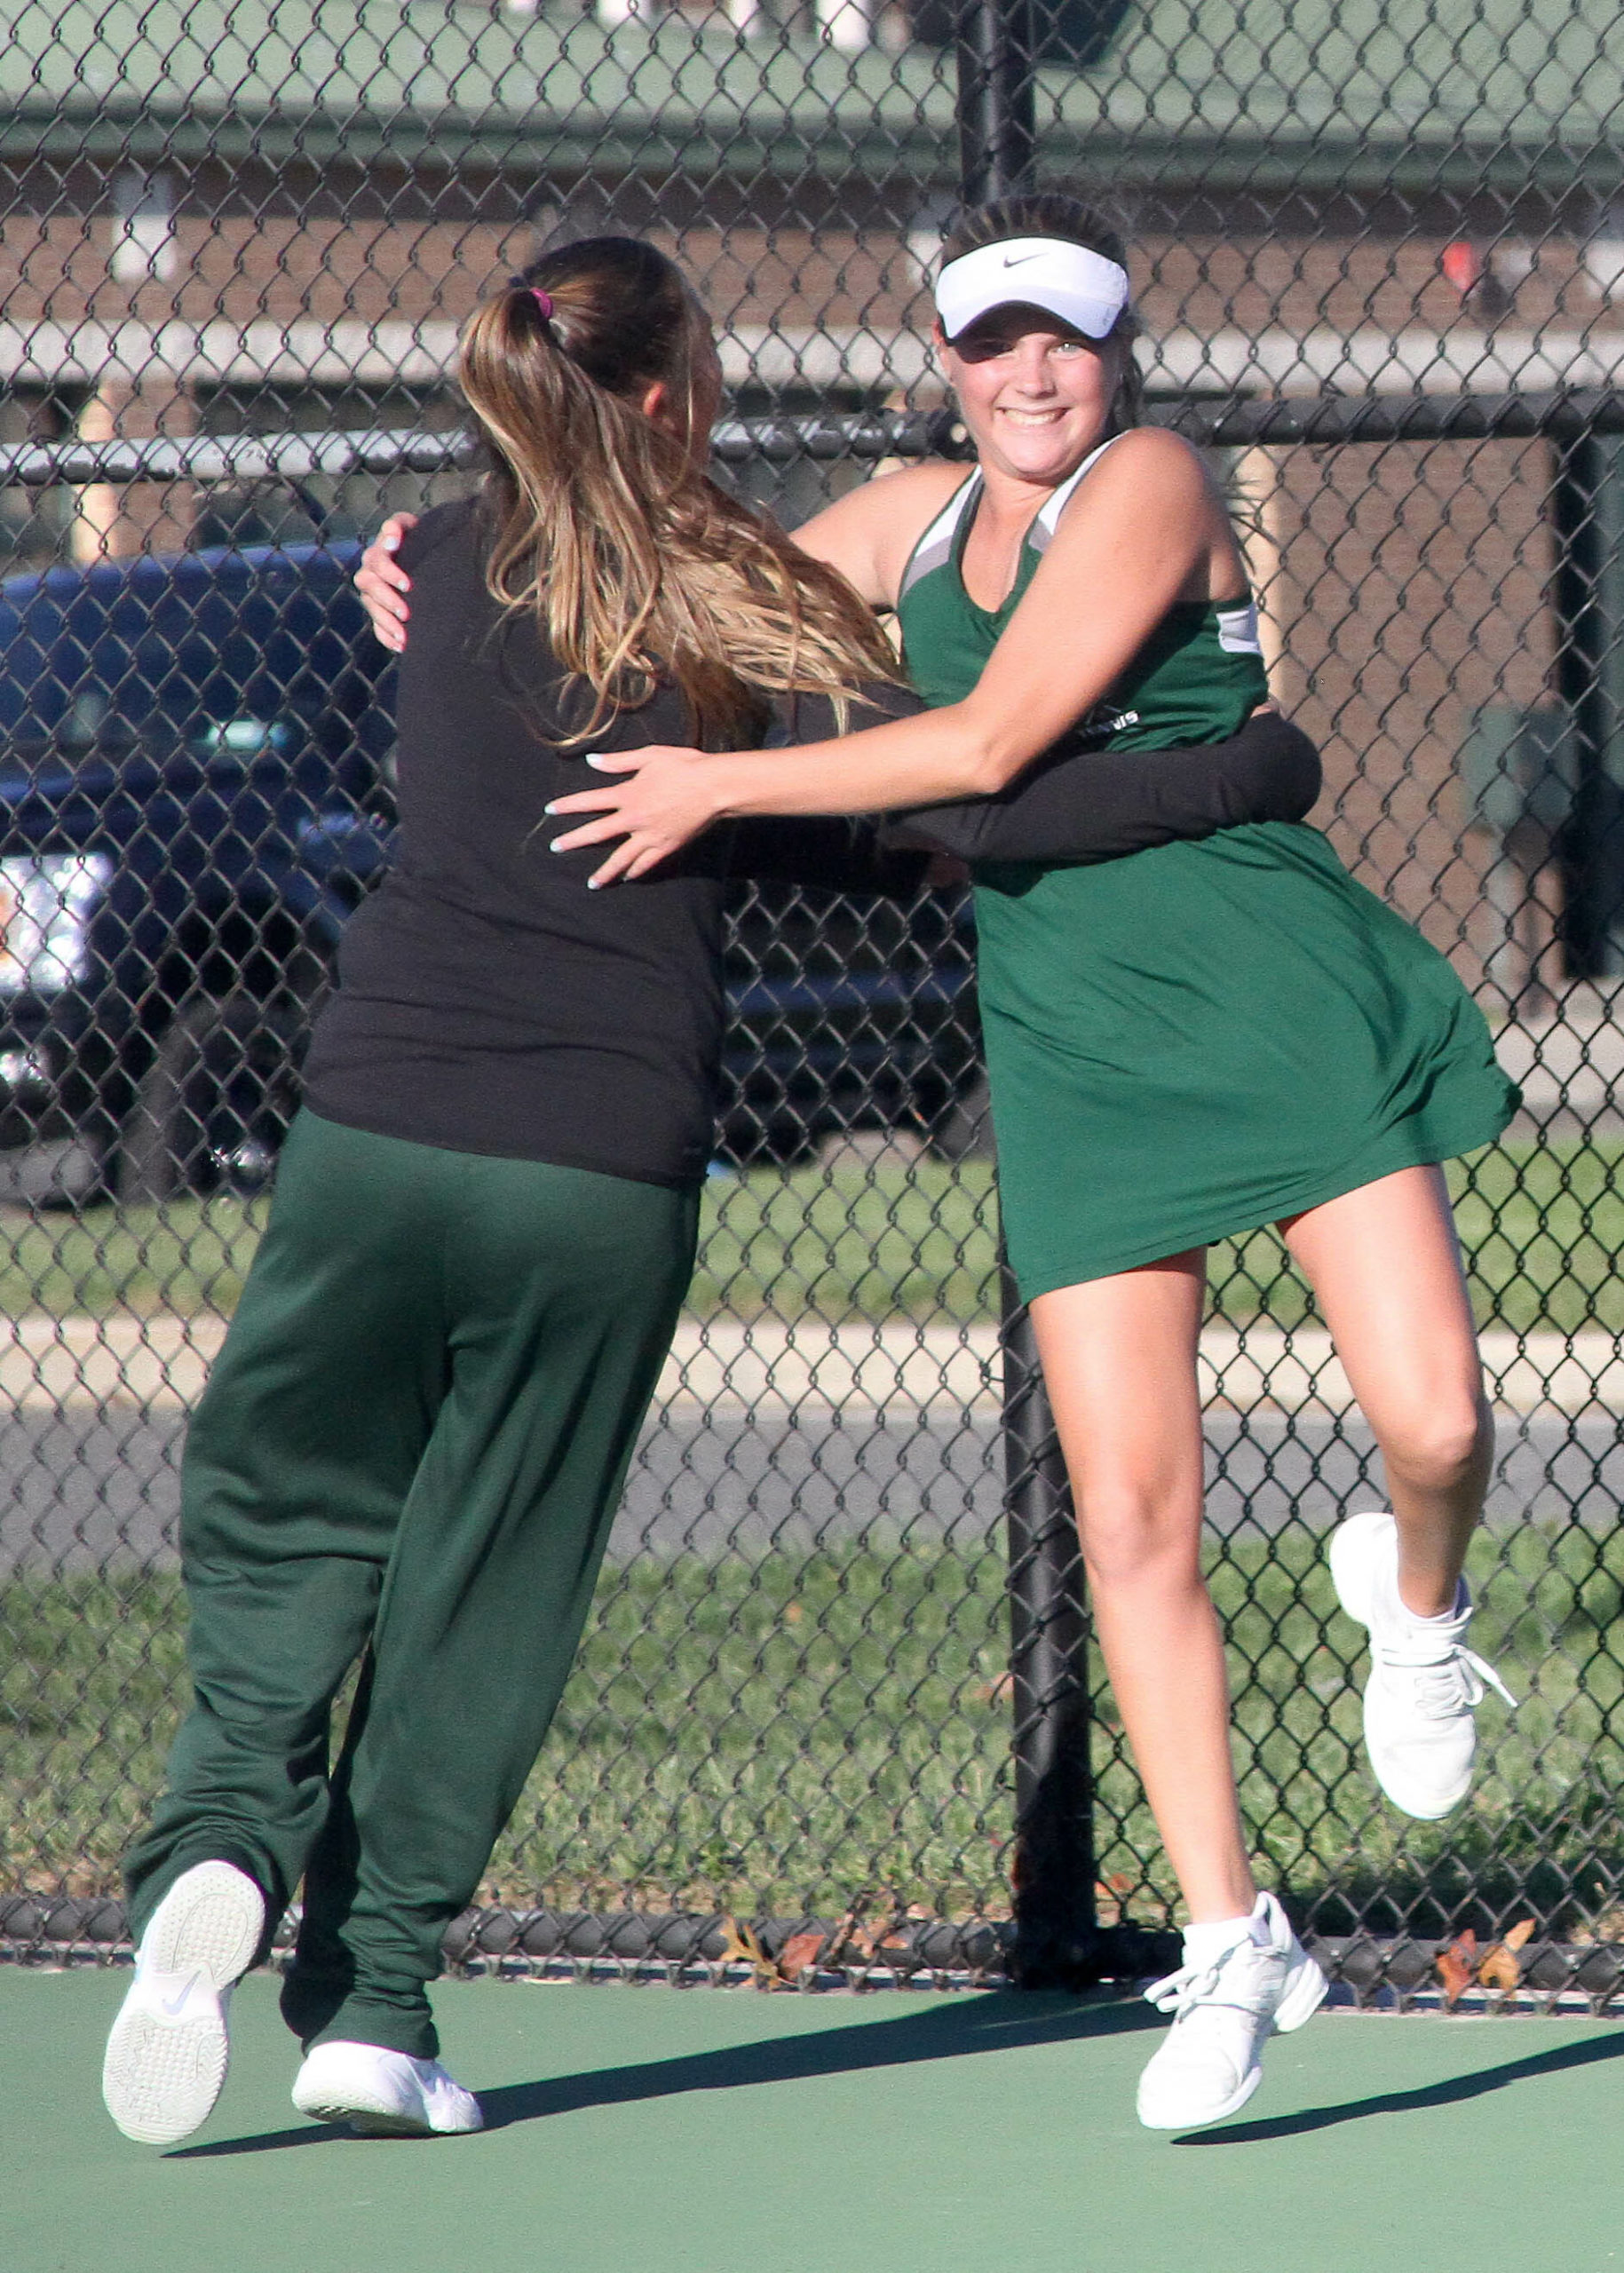 Westhampton Beach senior Emma Way is embraced by classmate Alexandra Sielaw after her match-clinching victory at No. 4 singles. DESIRÉE KEEGAN